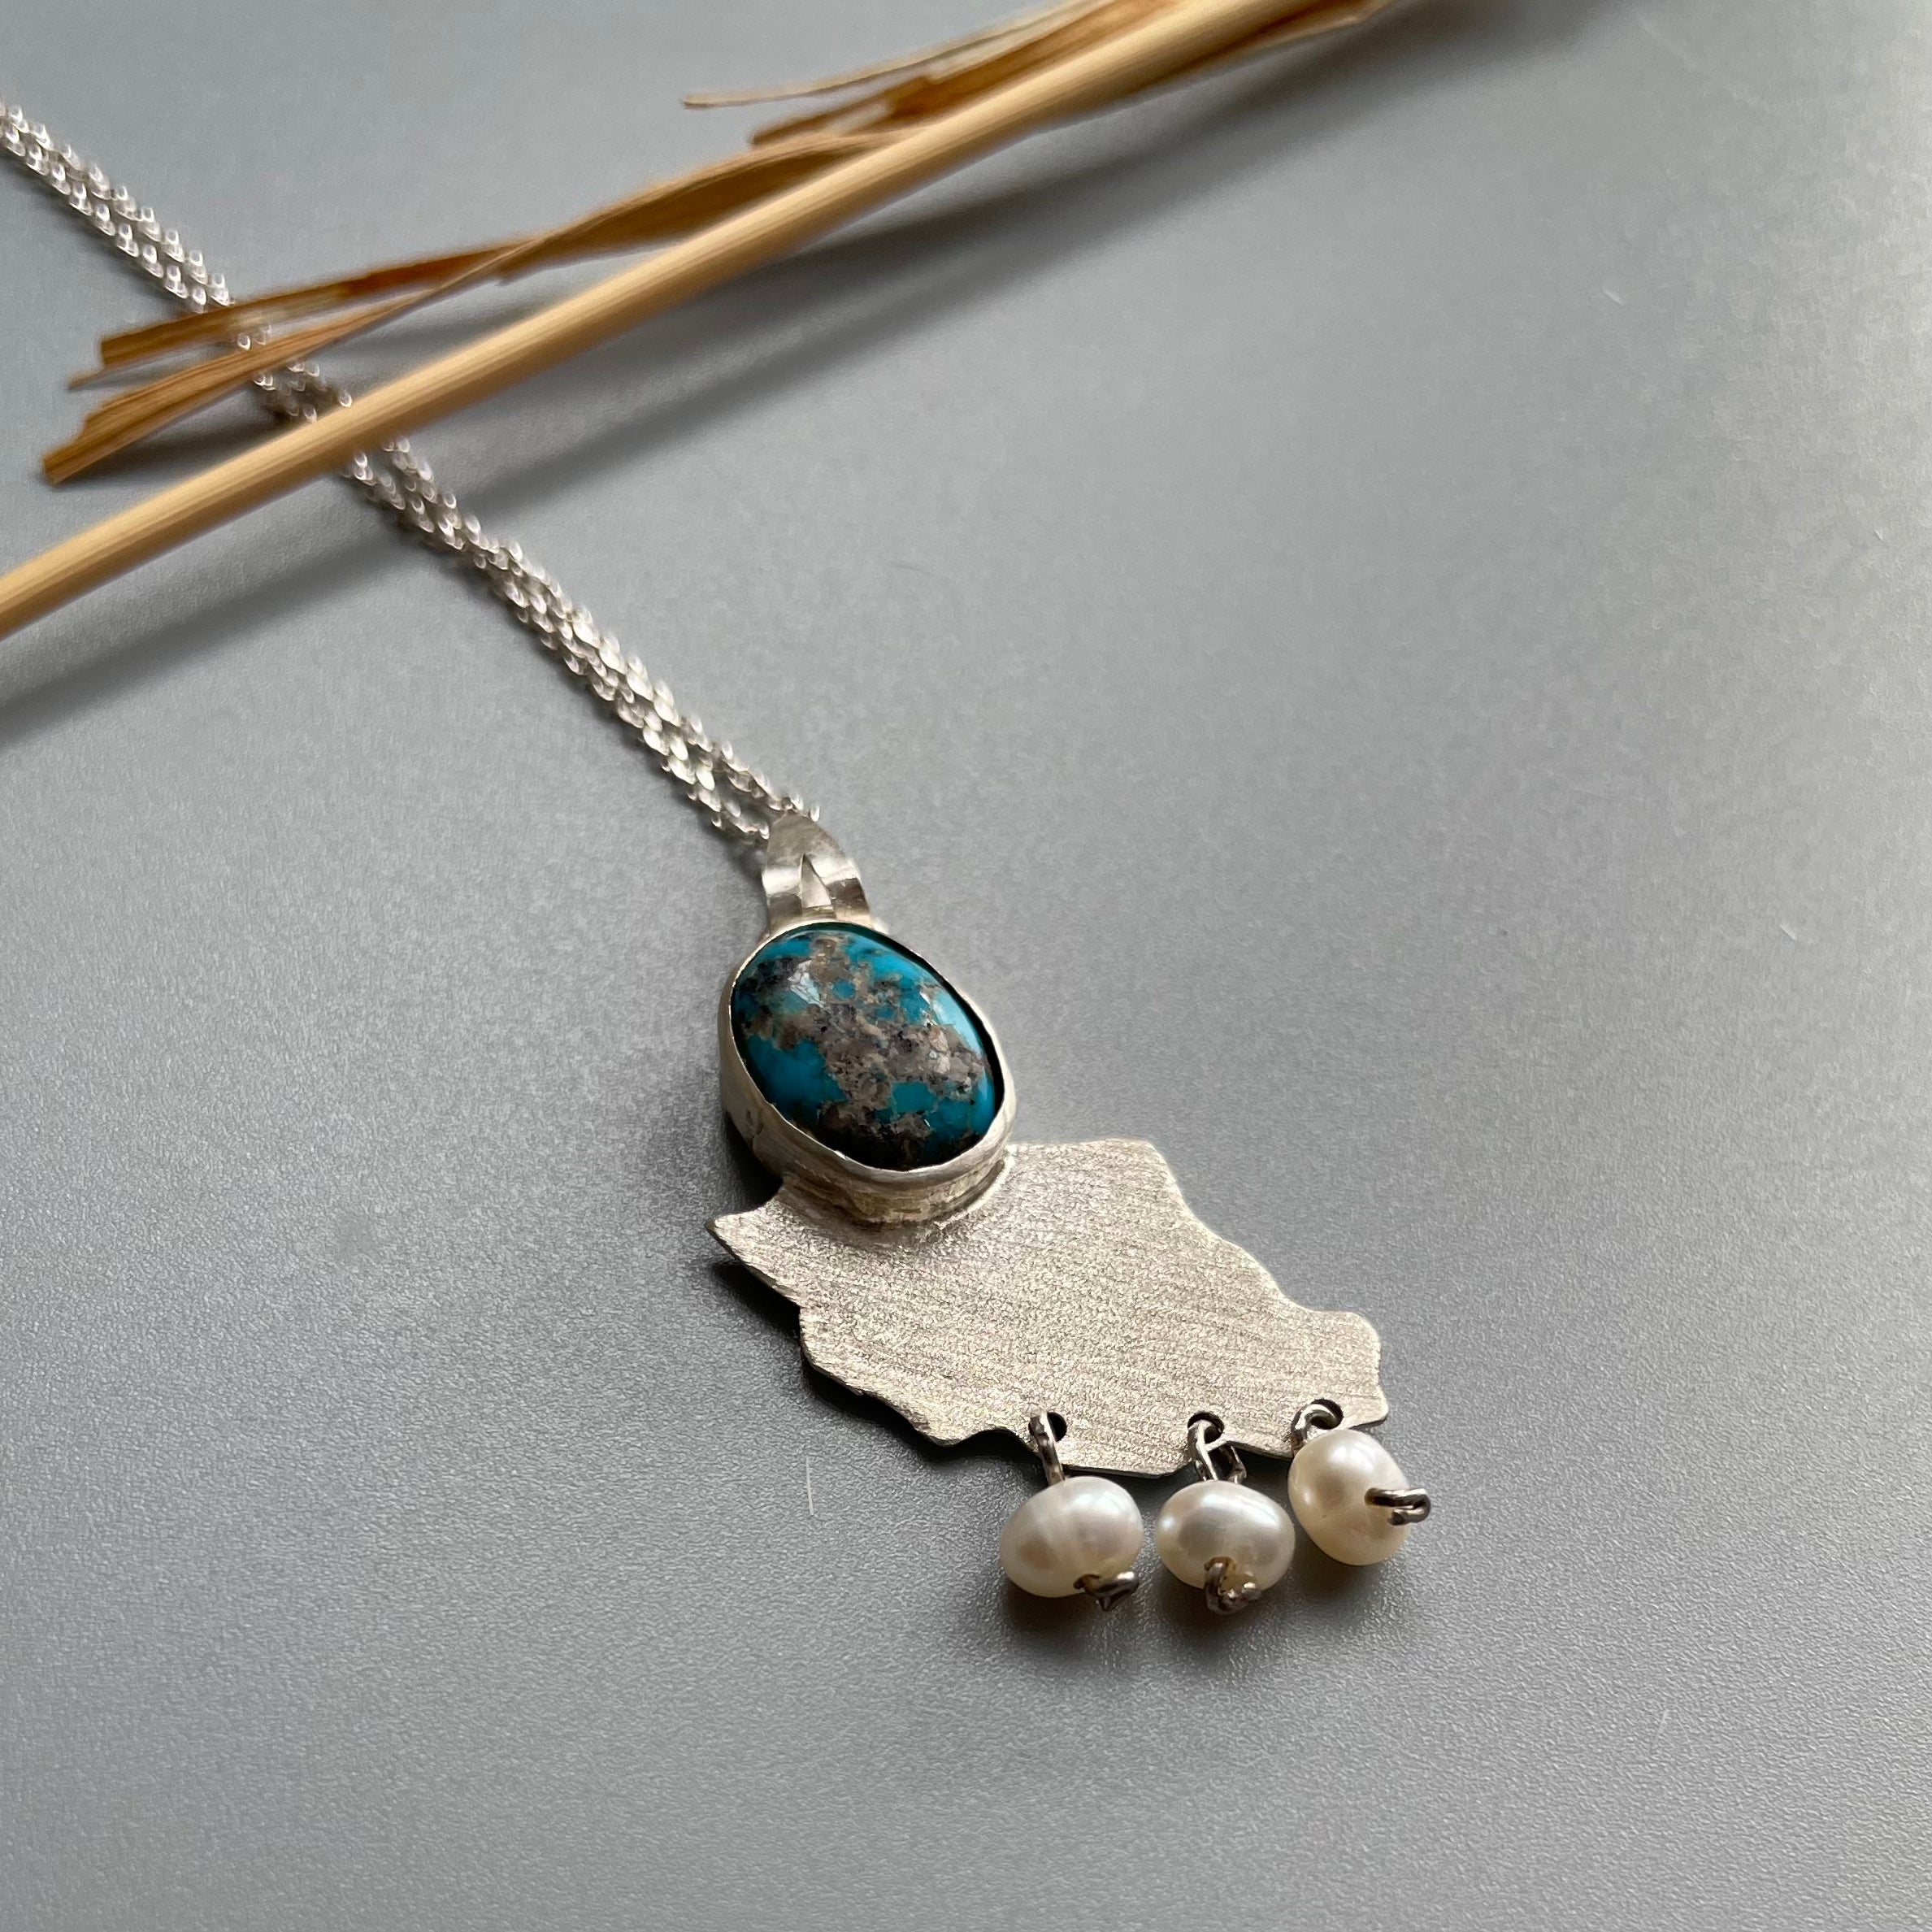 Persian Necklaces Handmade Iran Map Necklace with Natural Turquoise:Persian Jewelry-A ART GALLERY